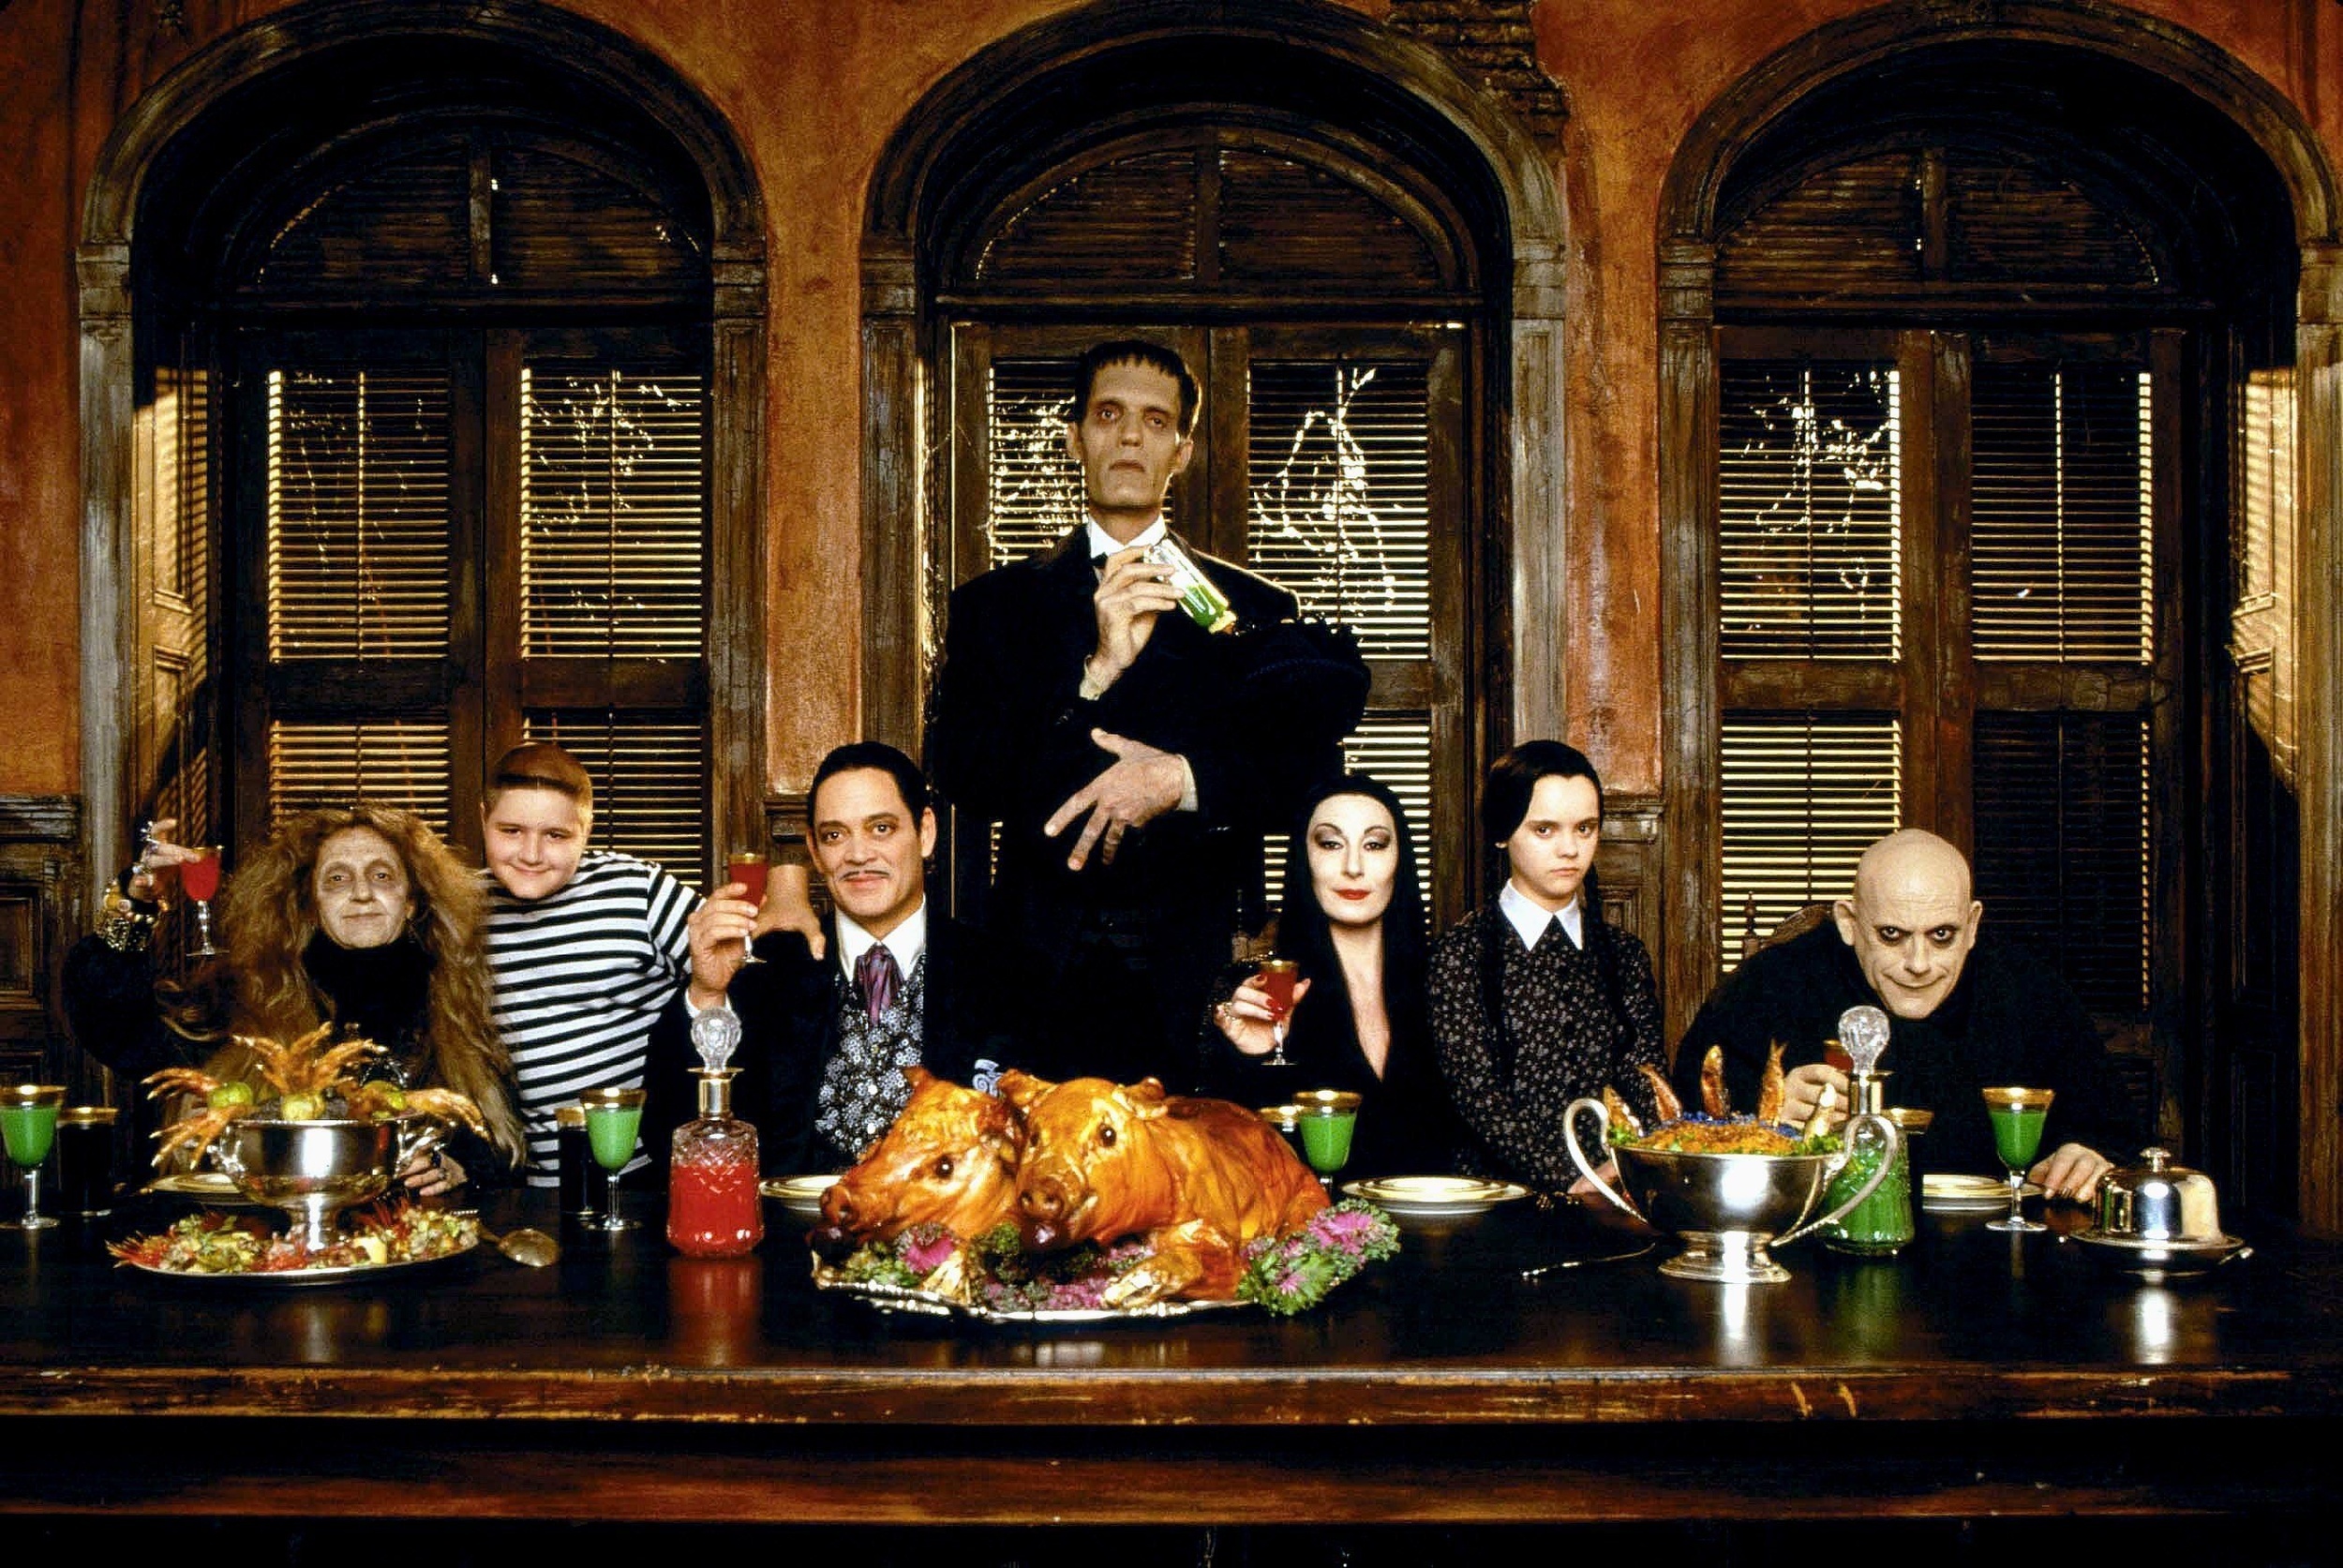 <p>After the success of <em>The Addams Family</em>, a sequel was quickly greenlit by Paramount. <em>Addams Family Values</em> came out in 1993 and was once again directed by Sonnenfeld. A lot of people think it is better, quality-wise, but it wasn’t as successful in the box office. With a budget of $47 million, <em>Addams Family Values</em> made $111 million.</p><p>You may also like: <a href='https://www.yardbarker.com/entertainment/articles/20_facts_you_might_not_know_about_avengers_endgame_040424/s1__38010735'>20 facts you might not know about 'Avengers: Endgame'</a></p>